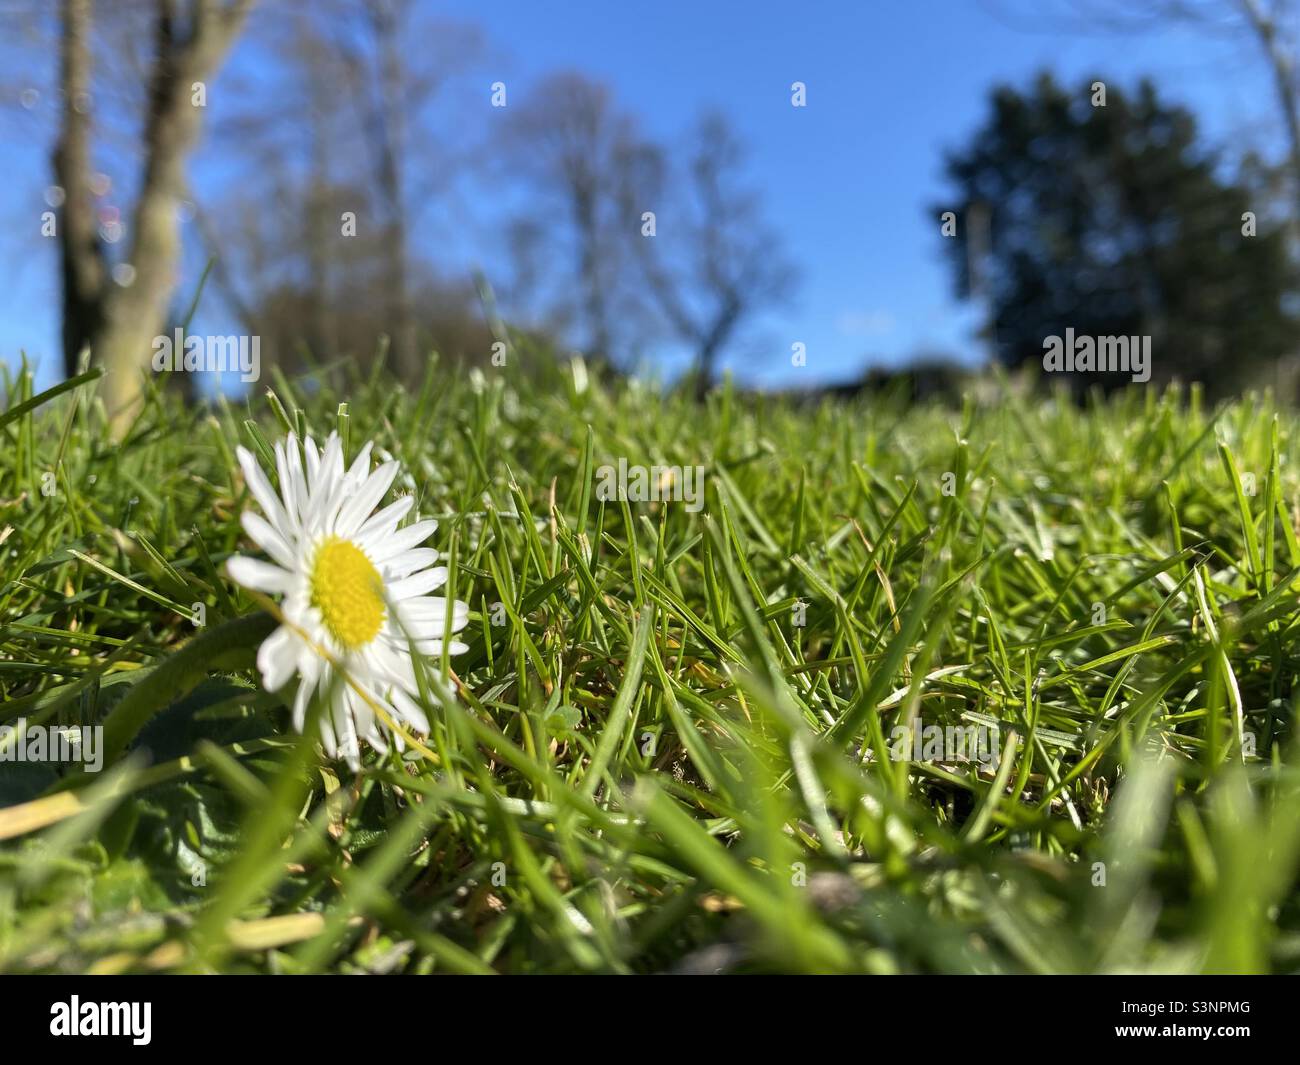 First flower of spring, a daisy reaching for the sun. Stock Photo